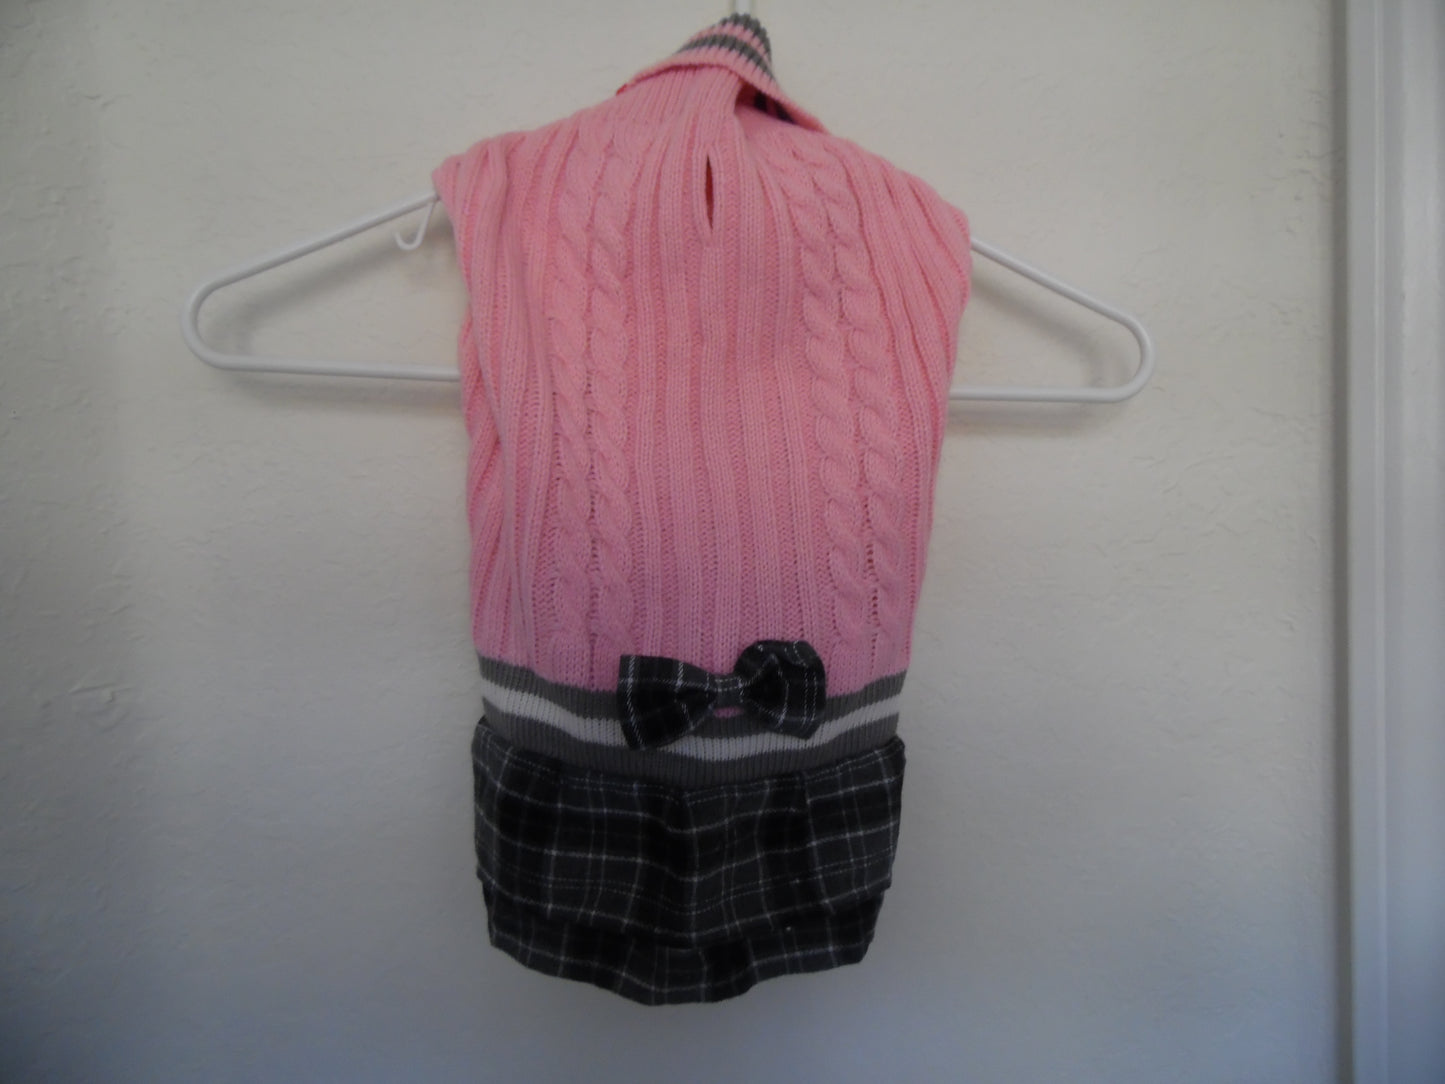 Pink & Gray Dog Sweater Dress with Bowtie Dog Turtleneck Pullover Knitwear for Small Dogs Girls Size Small